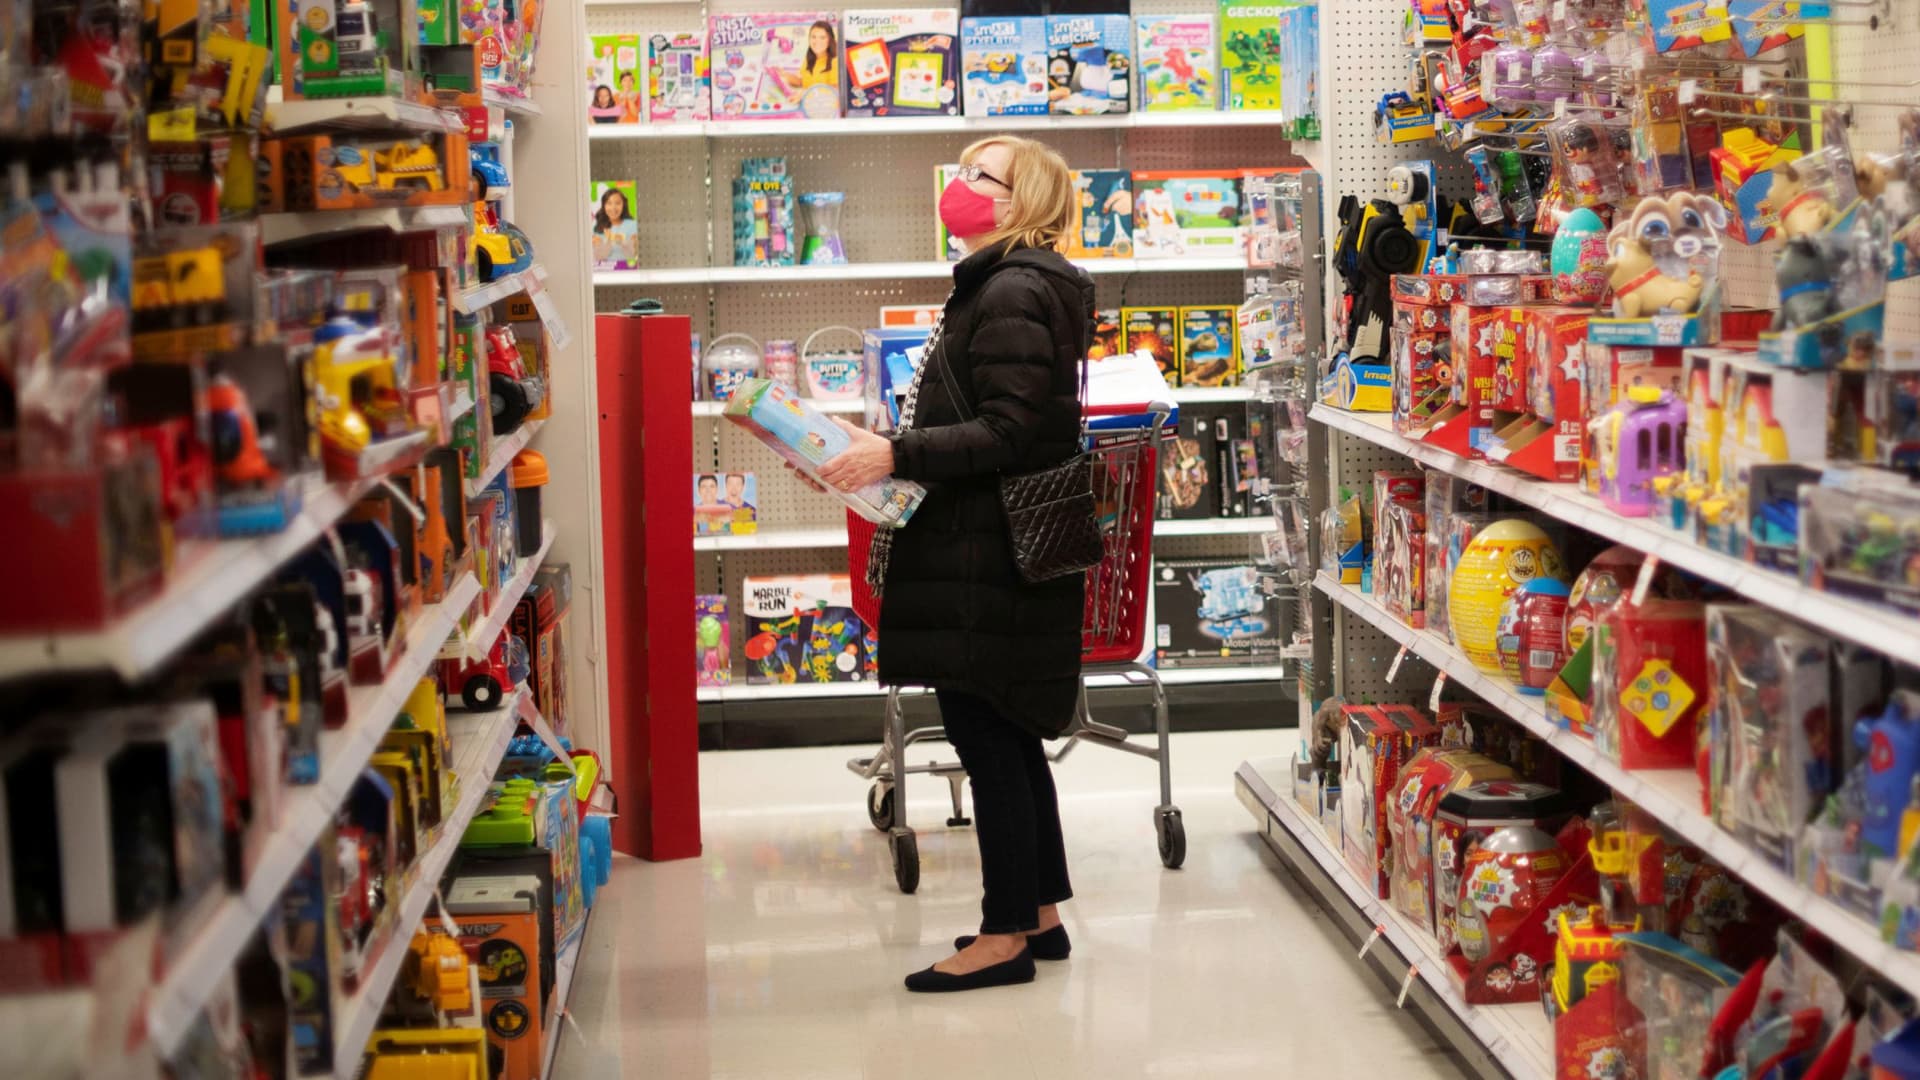 A shopper wearing a face mask due to the coronavirus disease (COVID-19) pandemic browses toys at a Target store in King of Prussia, Pennsylvania, November 20, 2020.